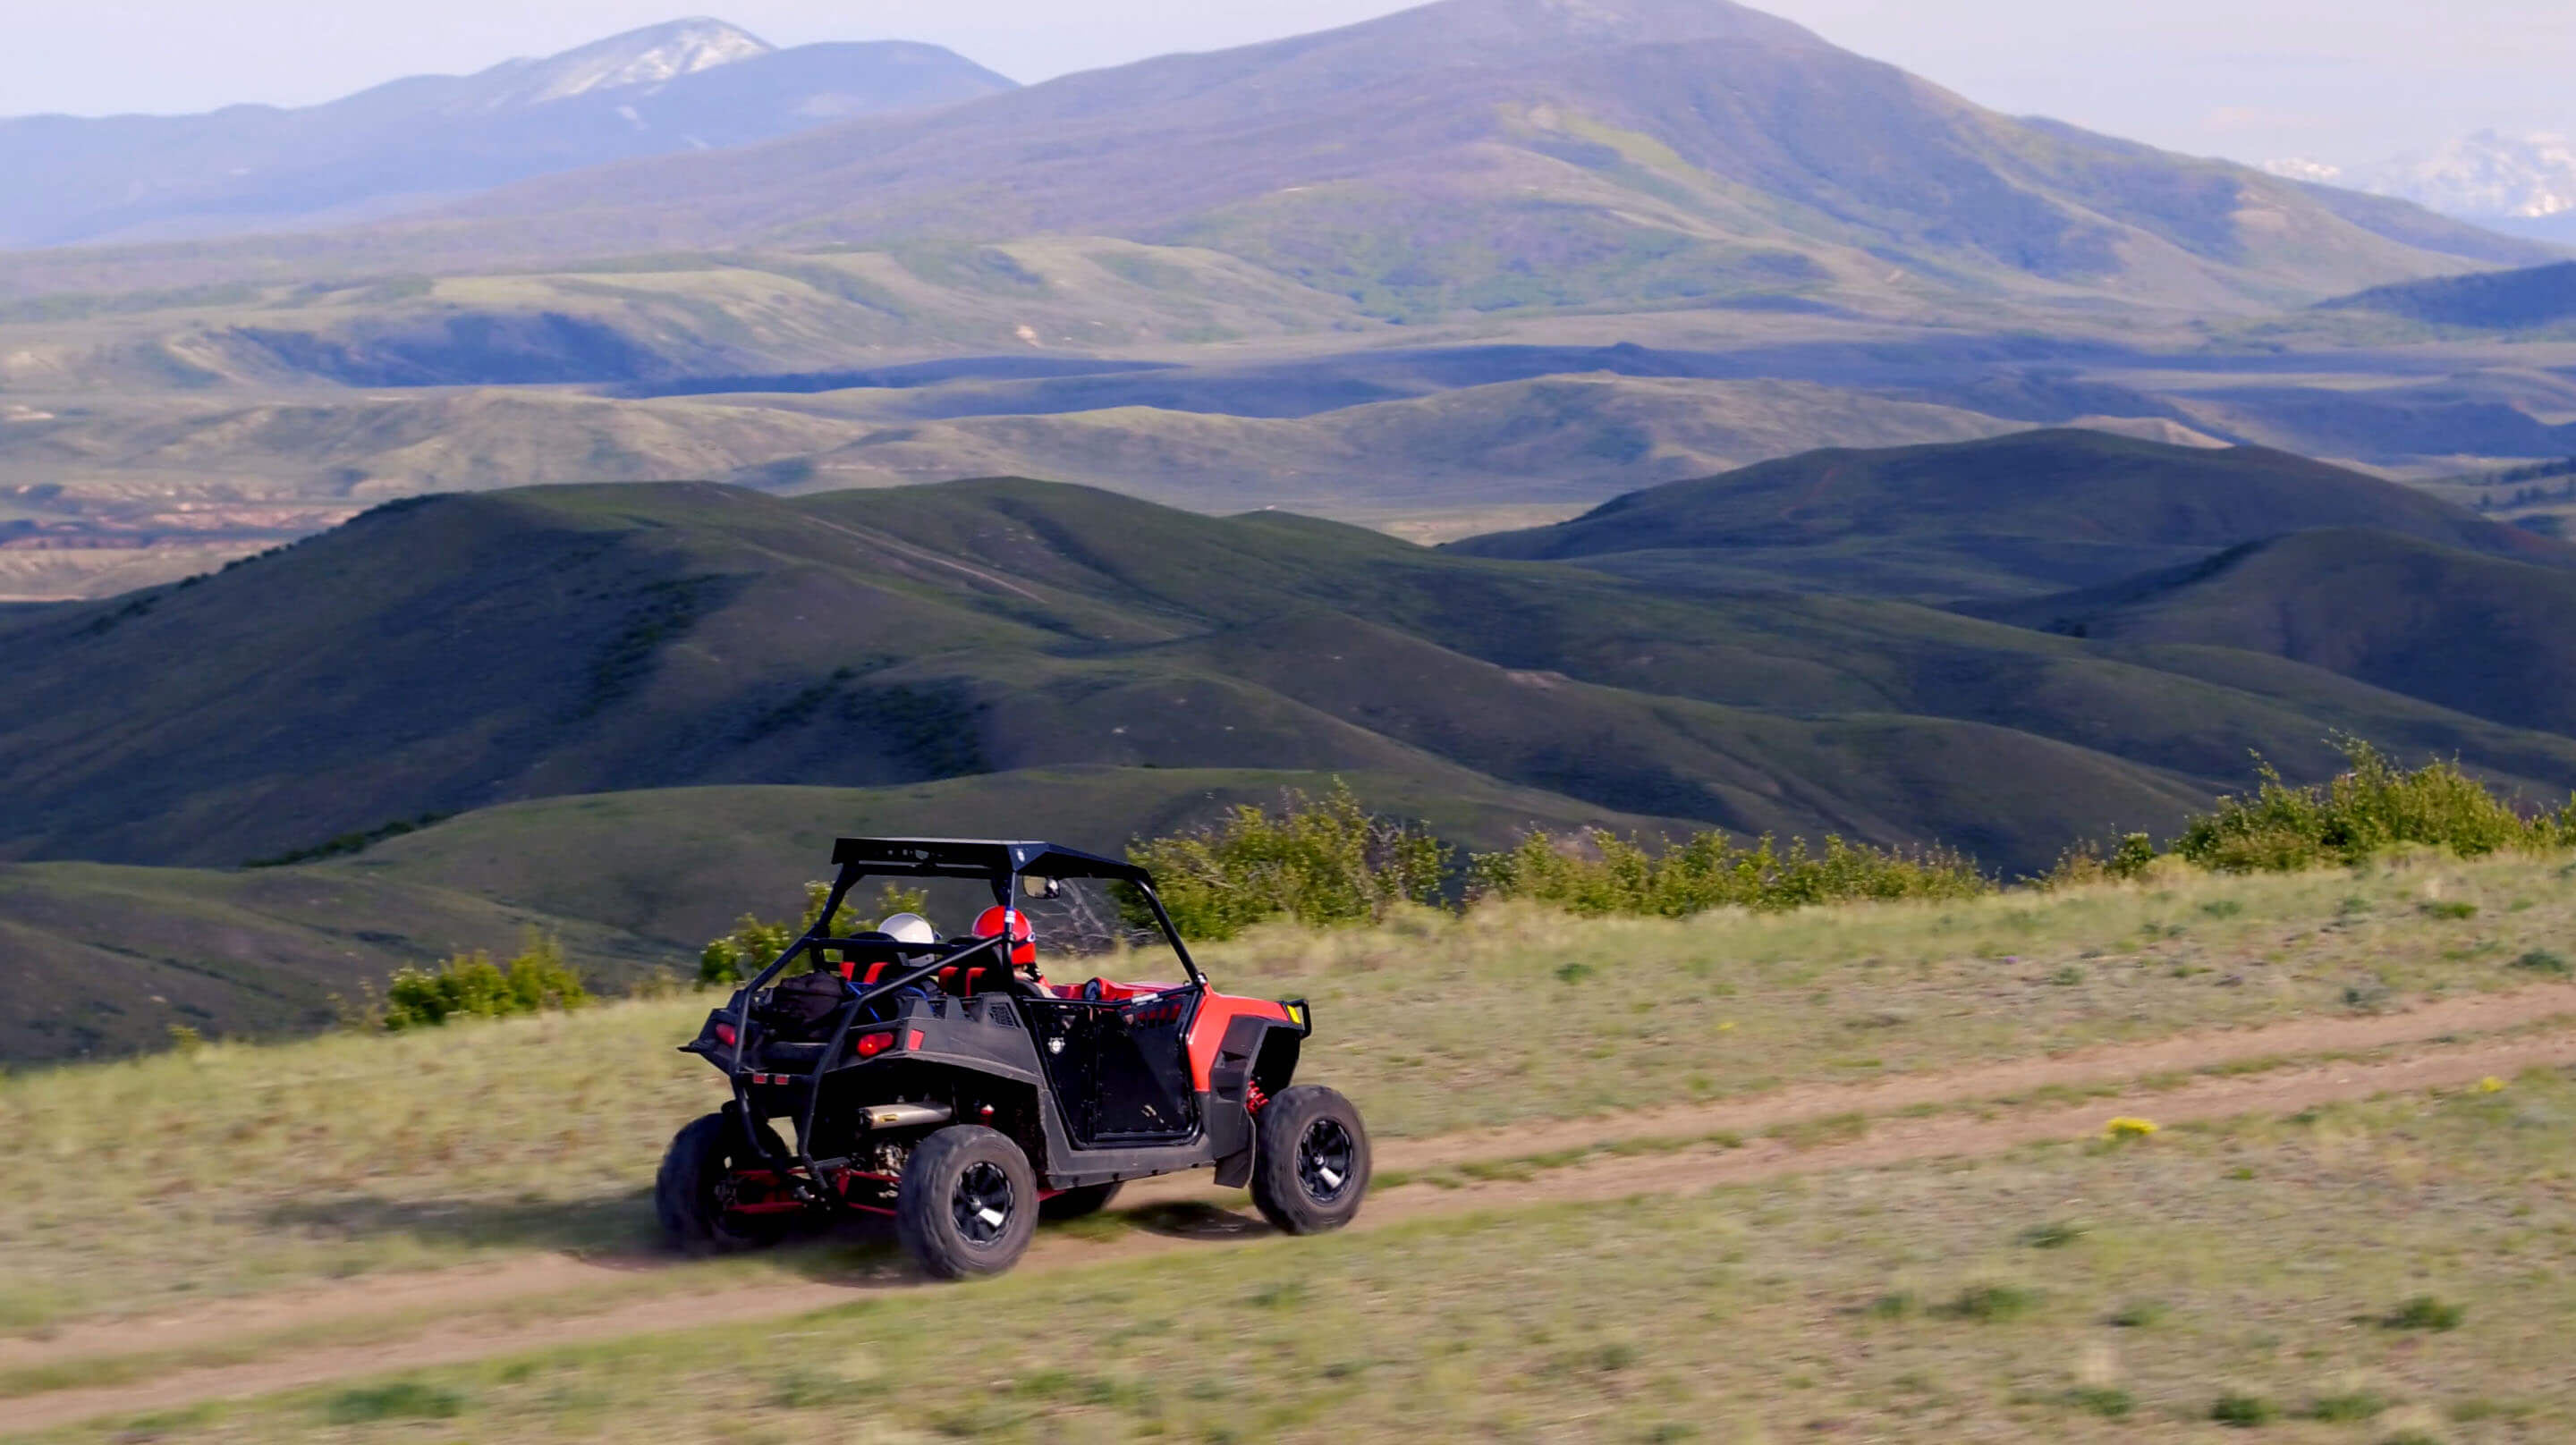 Red and black UTV with Colorado mountains in the background